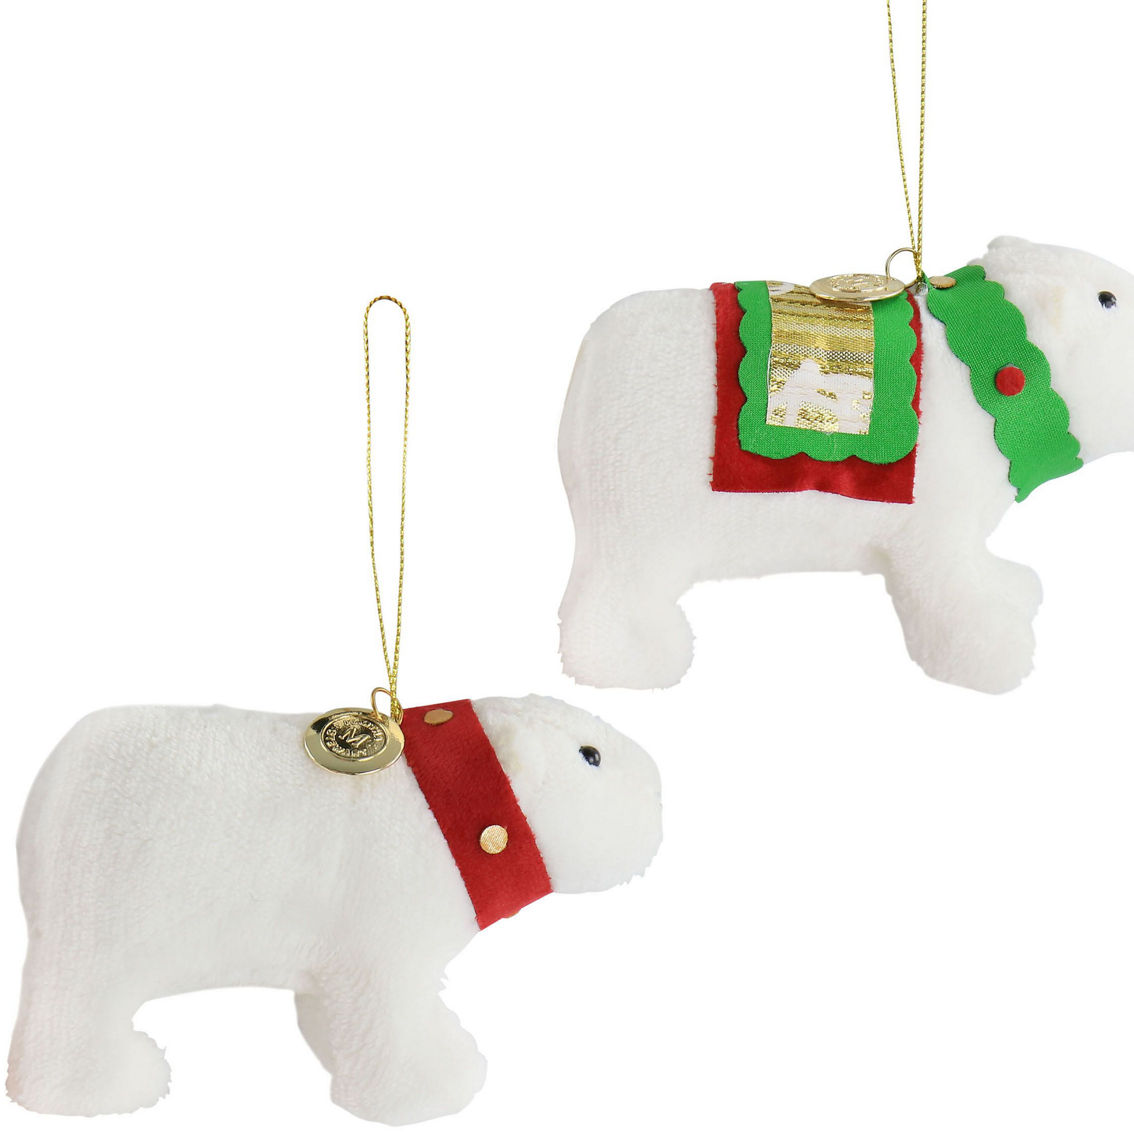 Martha Stewart Holiday Plush Polar Bear and Snowman 4 Piece Ornament Set in Whit - Image 5 of 5